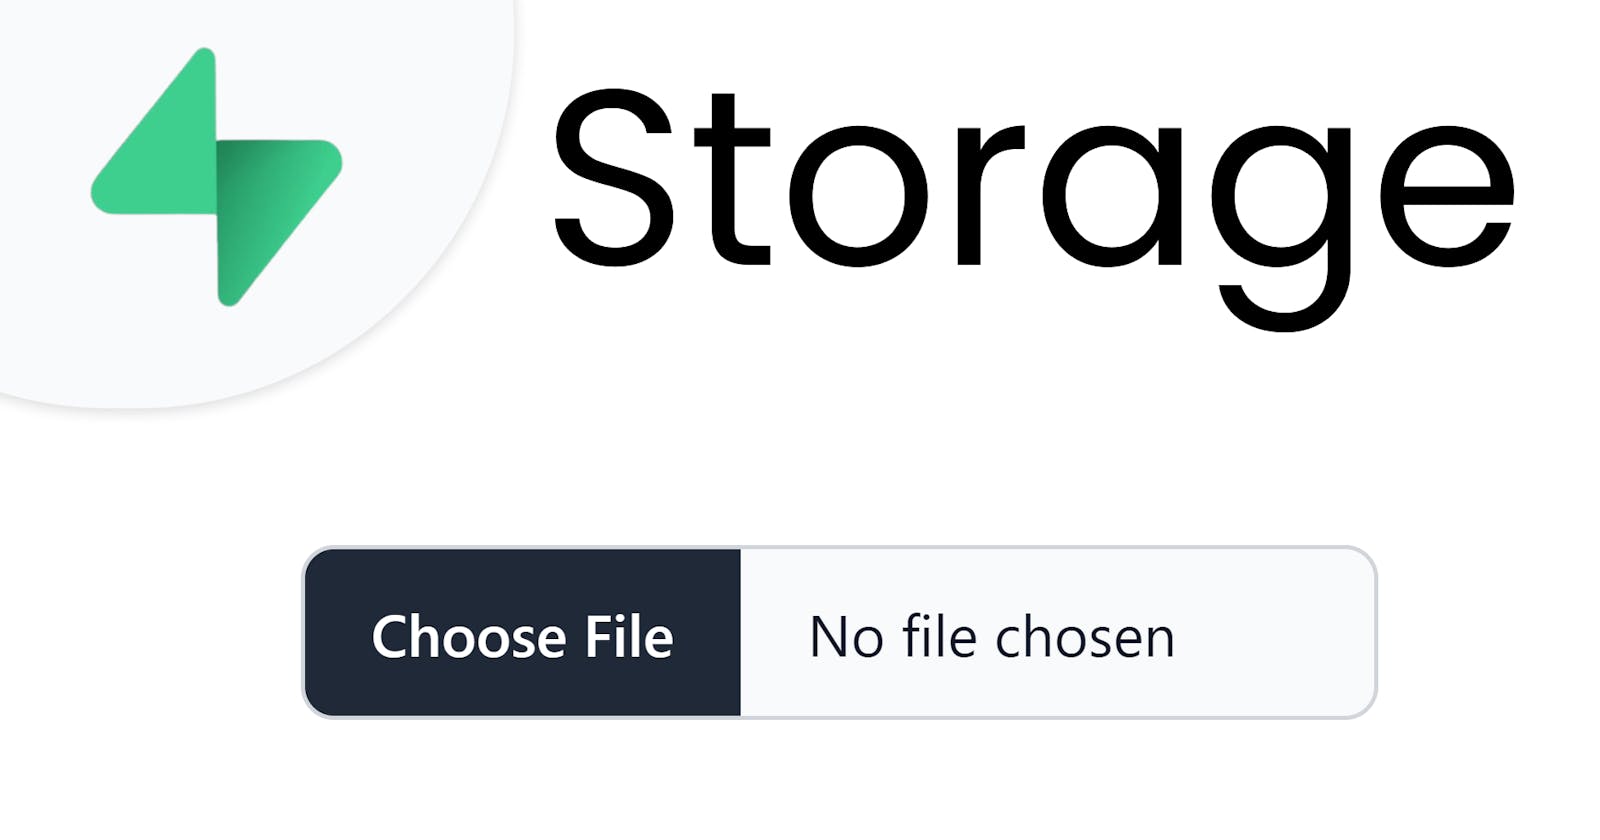 How to use supabase storage (upload file) easily and quickly 🚀.